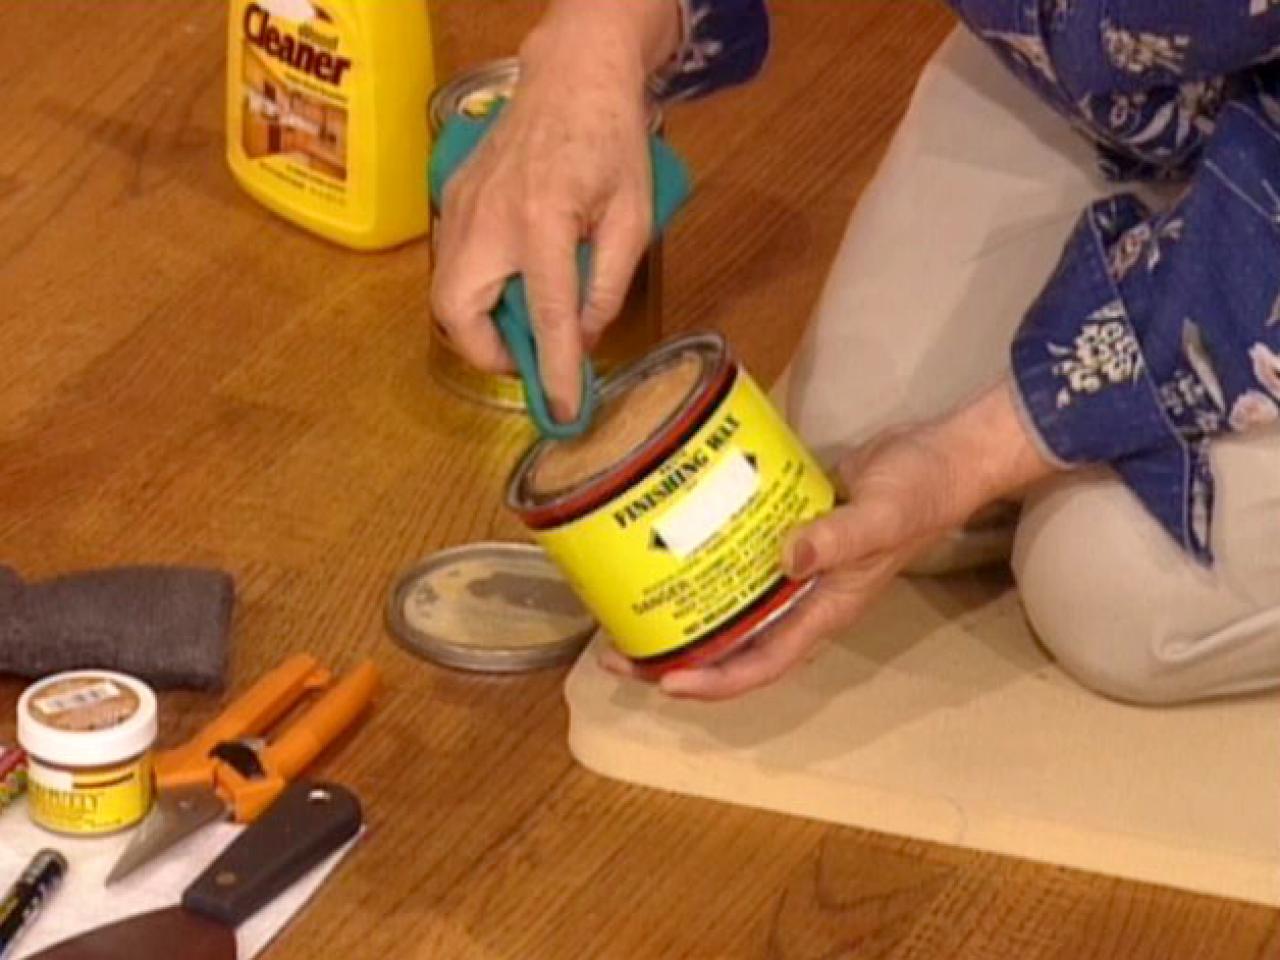 How To Touch Up Wood Floors Tos Diy, How To Remove Wax From Hardwood Floor